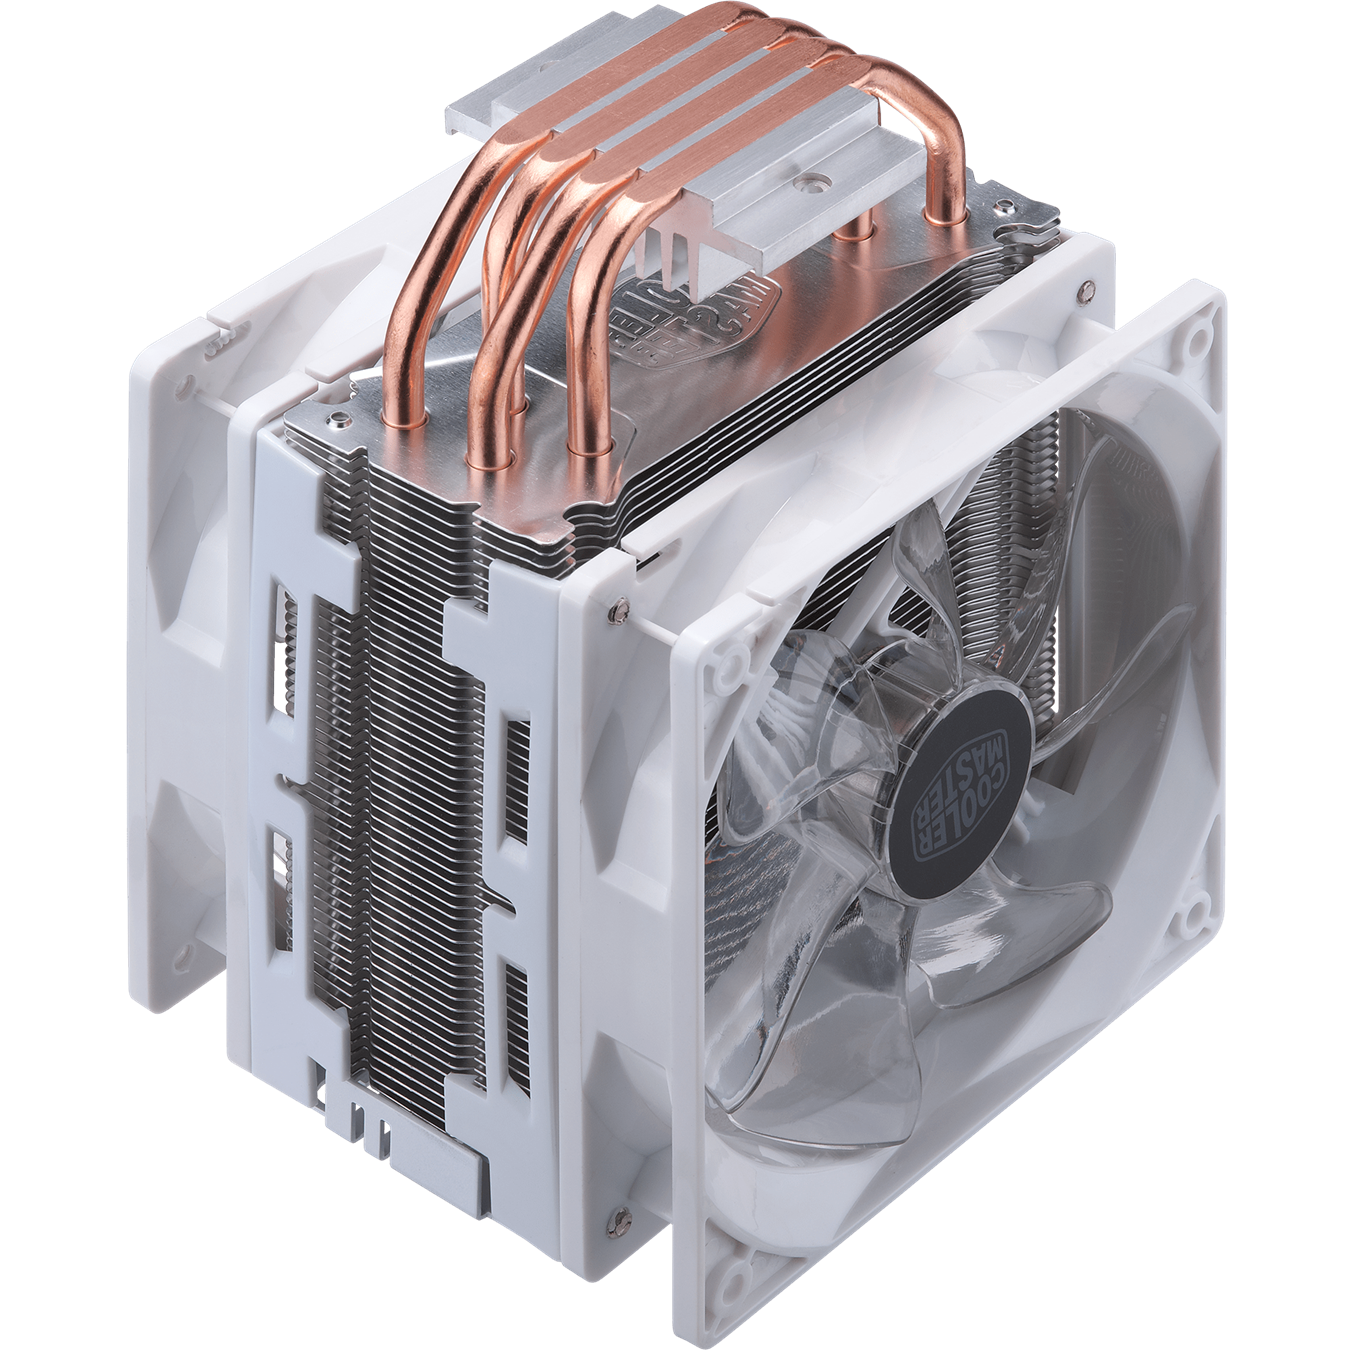 Hyper 212 LED Turbo White Edition CPU Air Cooler | Cooler Master